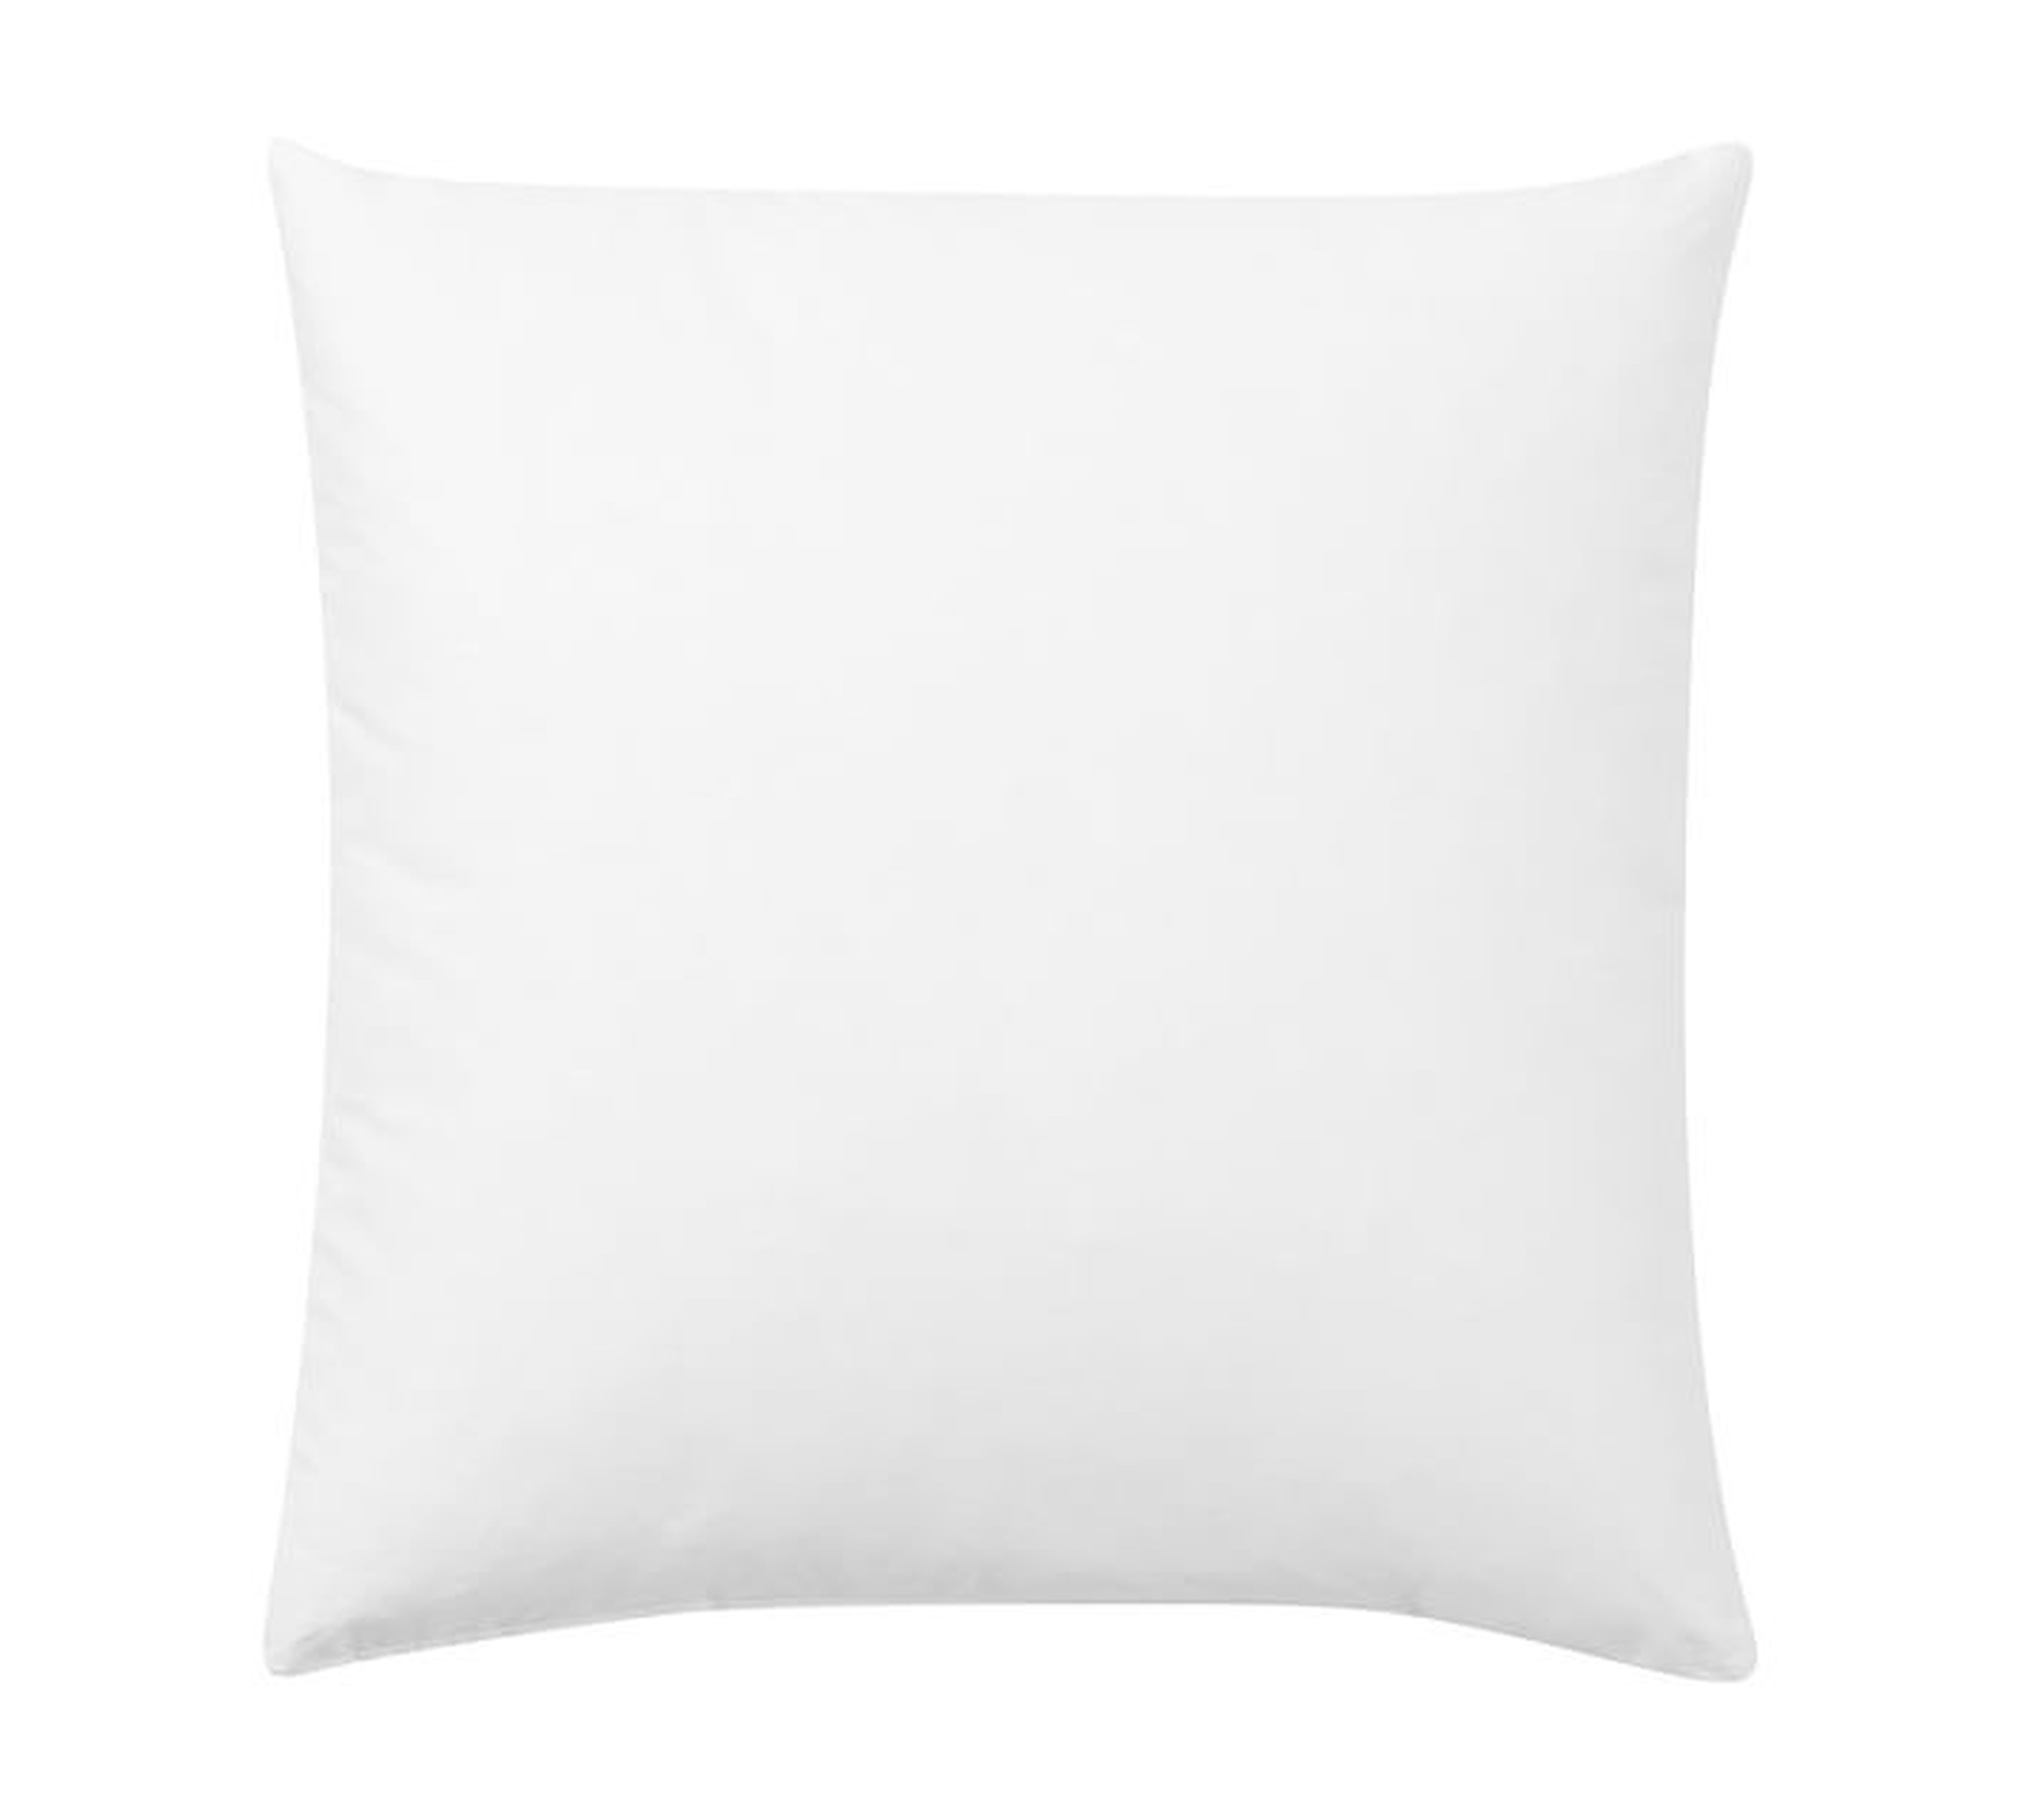 20" Square Feather Pillow Insert - Pottery Barn